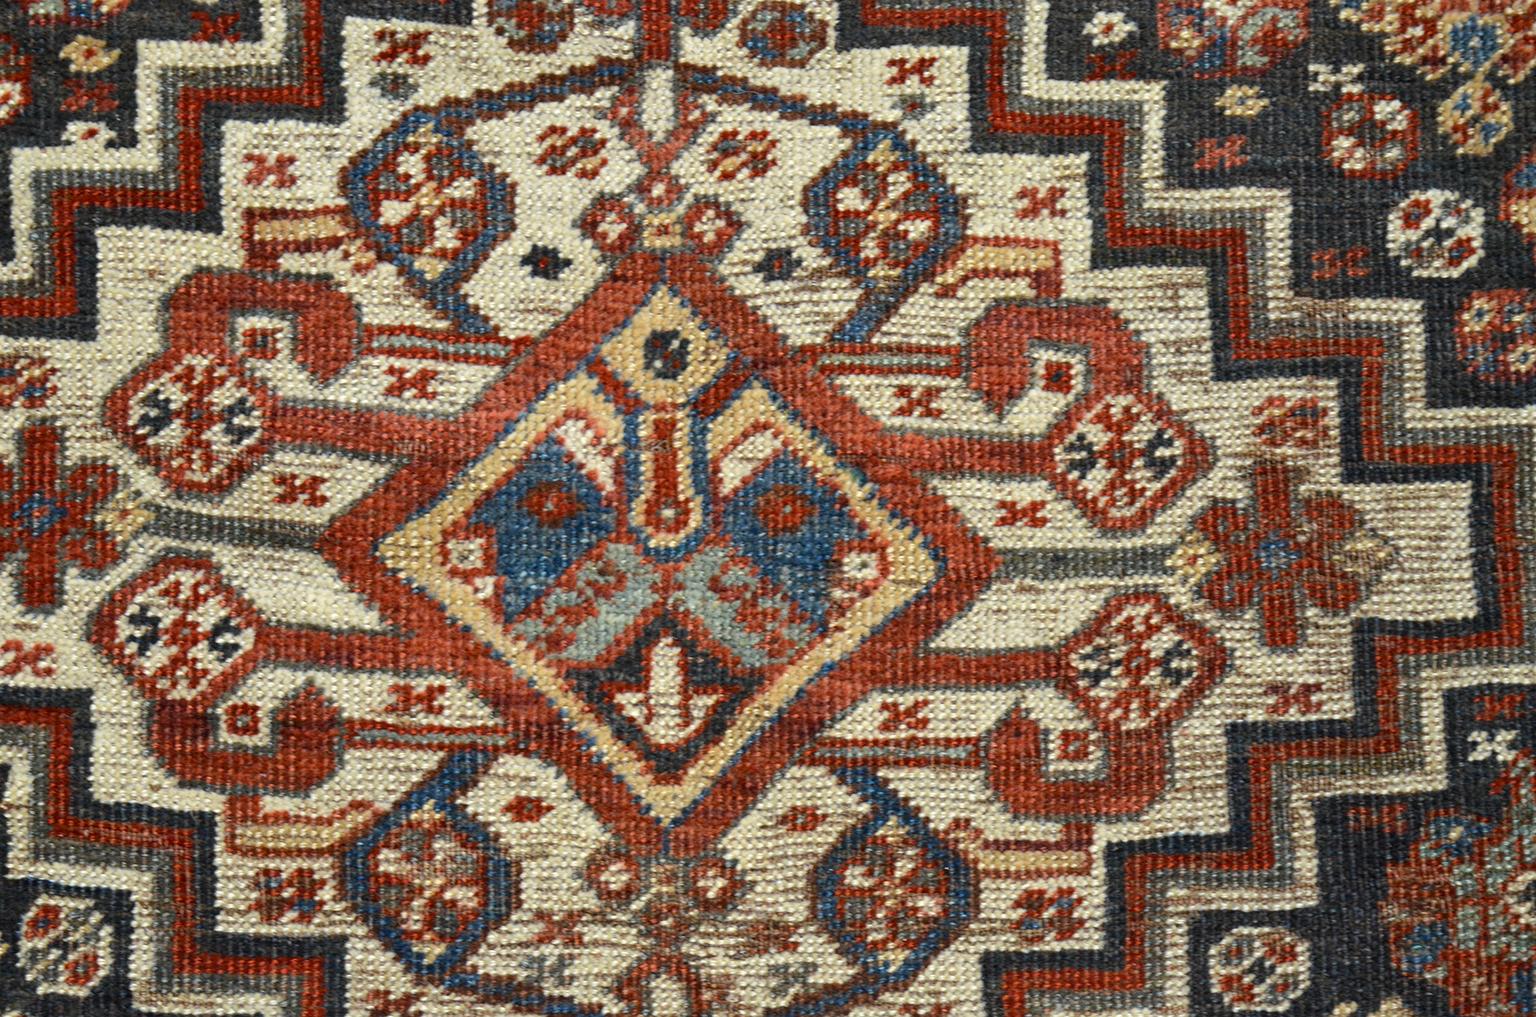 Other Antique 1880s Persian Qashqai Rug, 5' x 6' For Sale